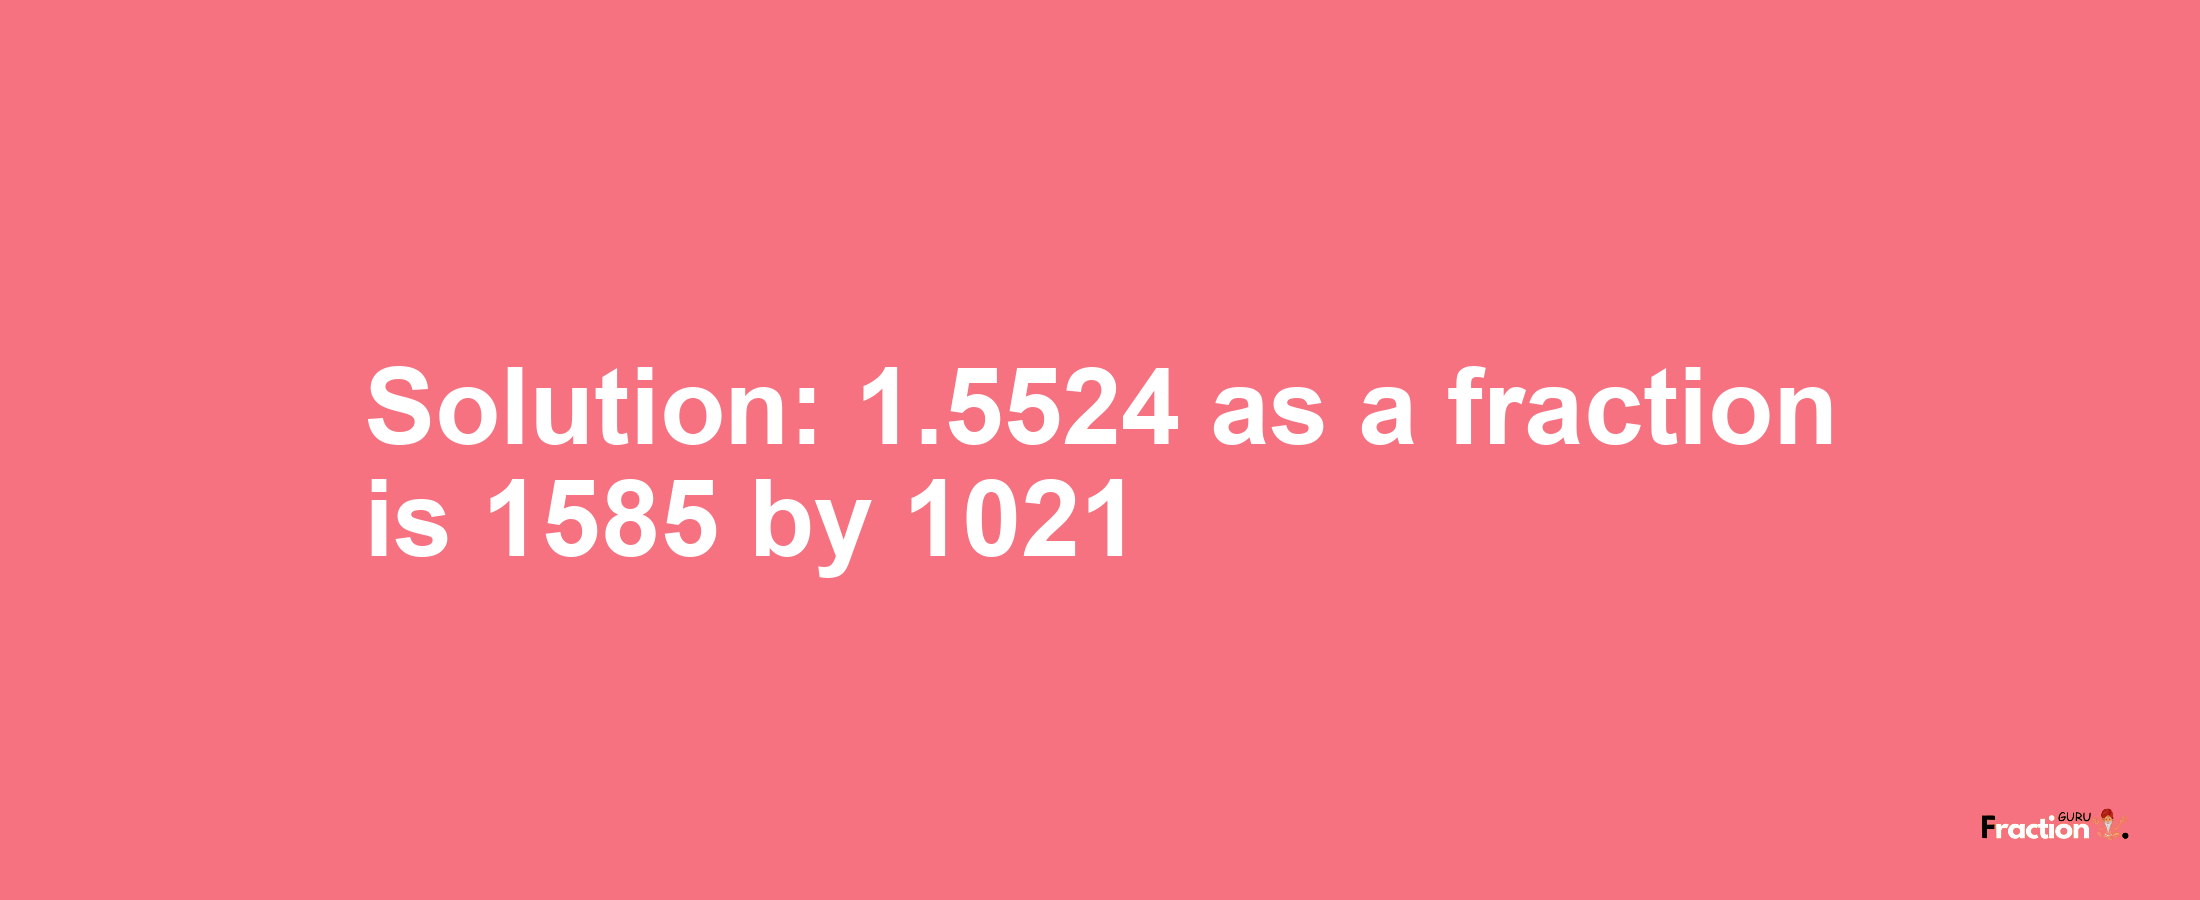 Solution:1.5524 as a fraction is 1585/1021